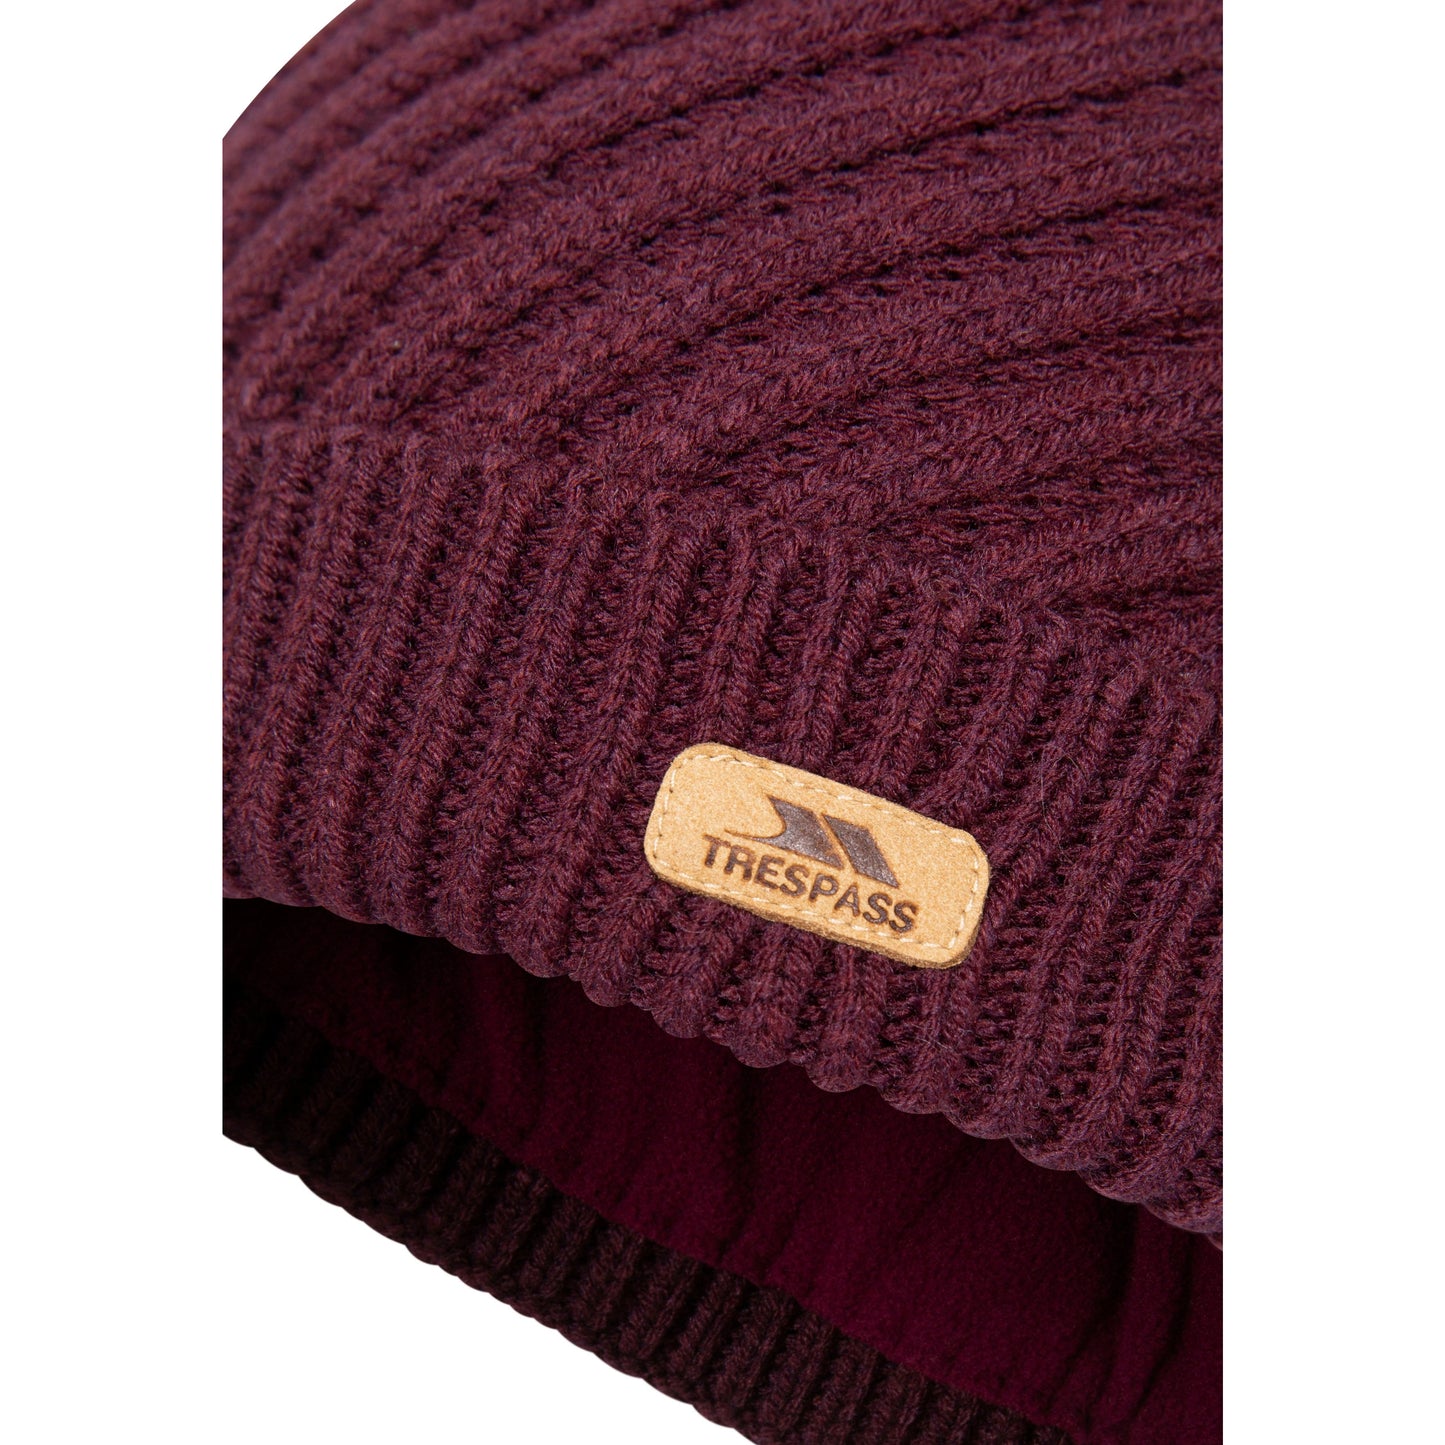 Twisted Womens Knitted Hat in Fig with Fleece Lining